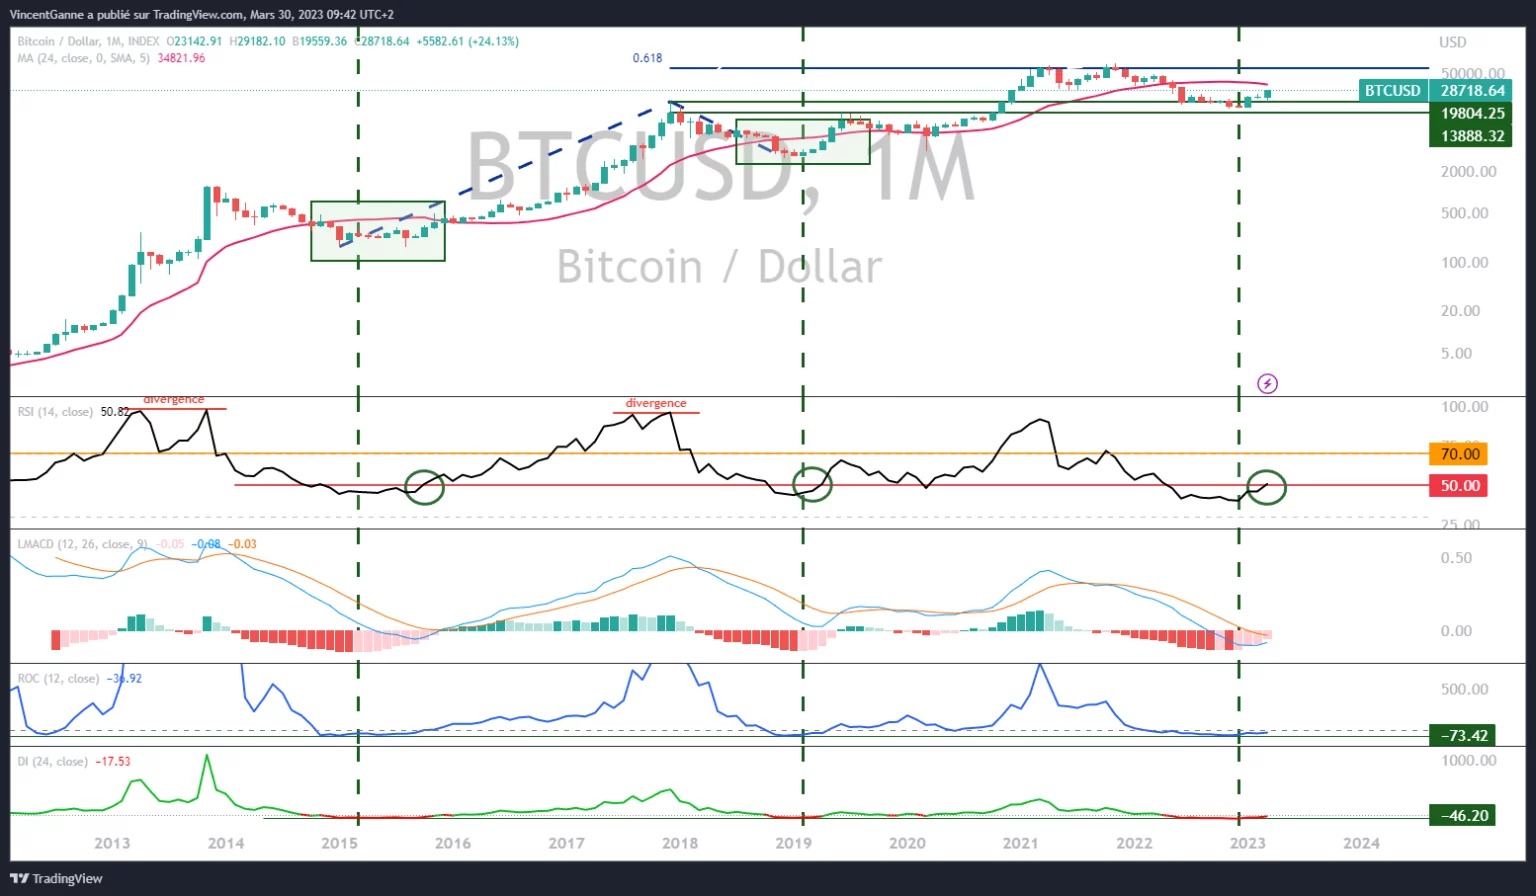 Chart that exposes the Japanese candlesticks in monthly bitcoin price data